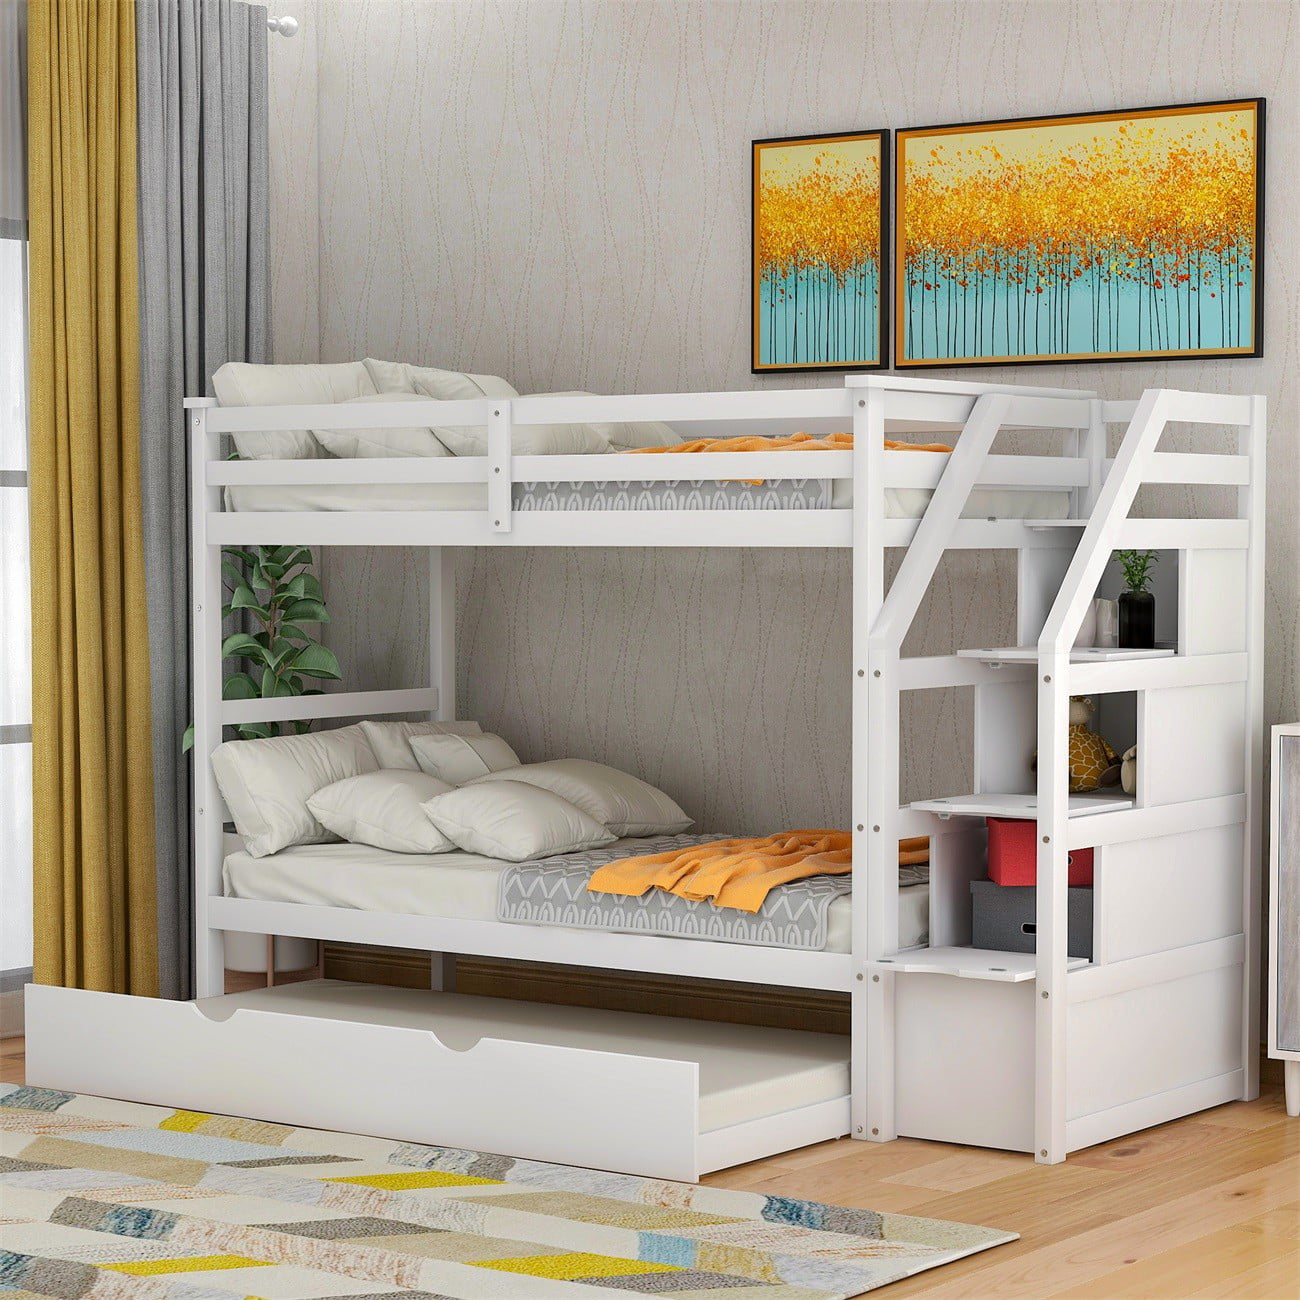 Single/Double Bunk Bed (With Drawers) Dani's Furniture